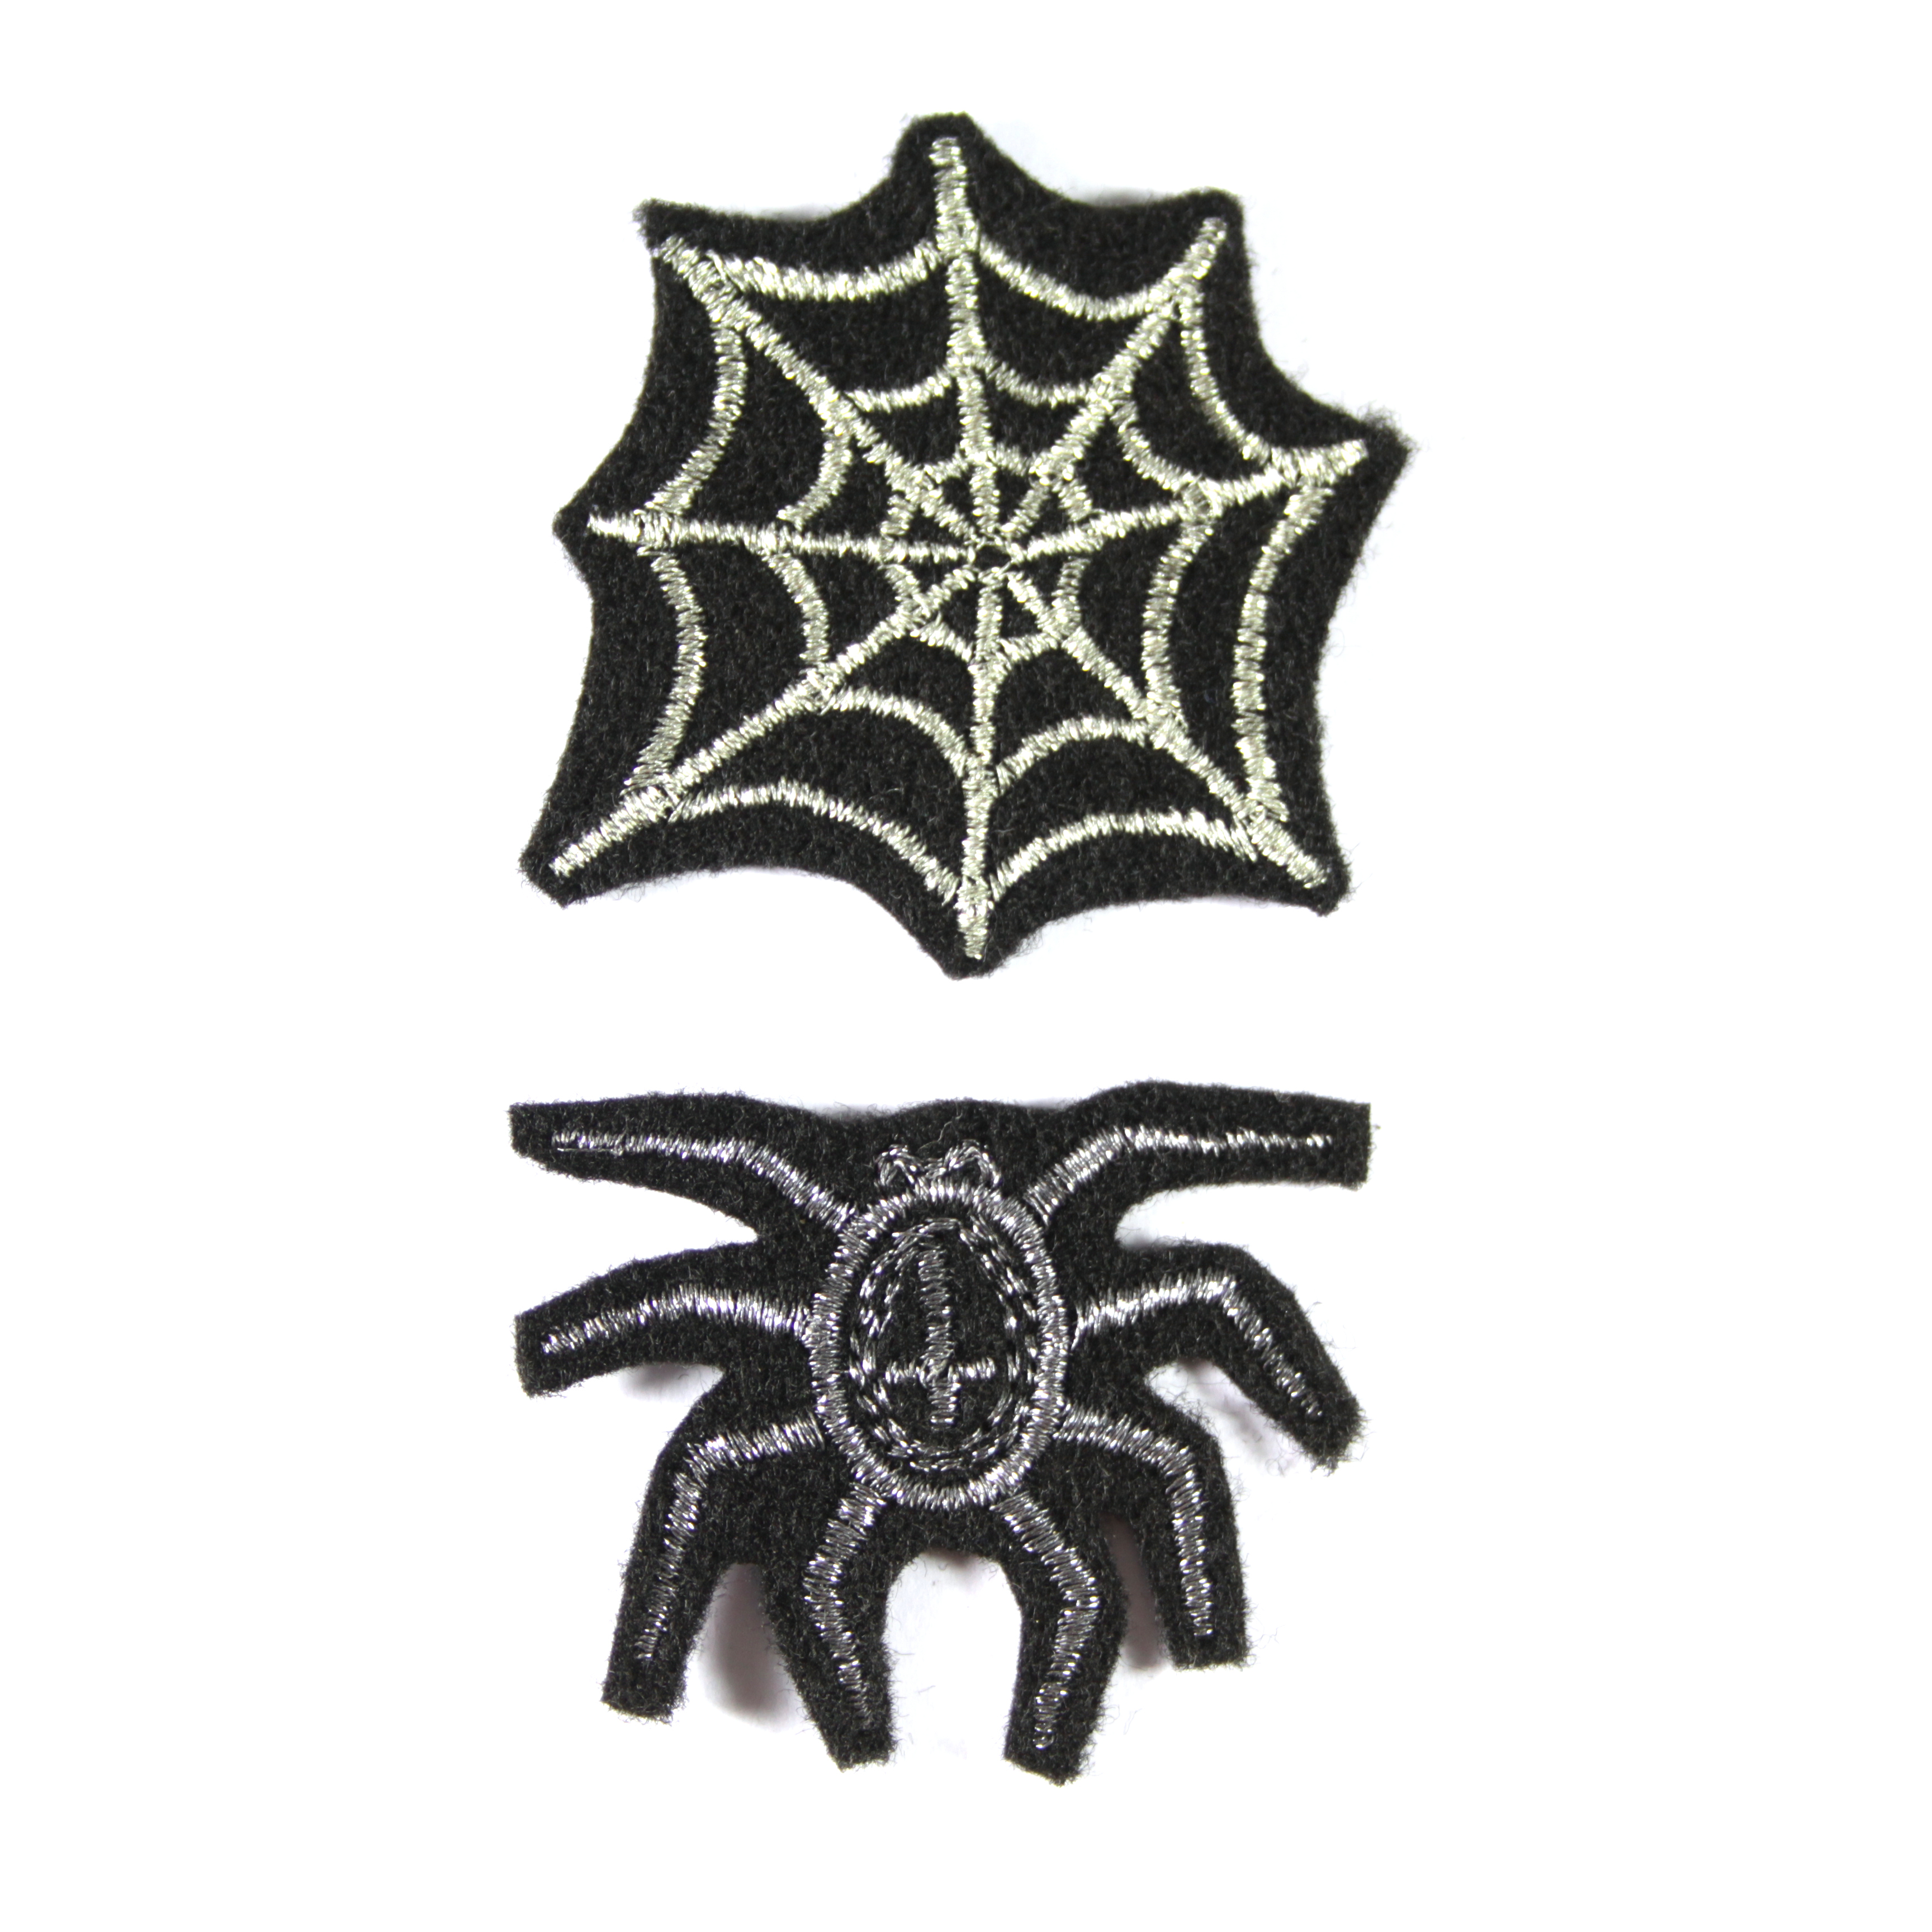 Spider & spider web iron-on images glitter set two mini silver iron-ons spider